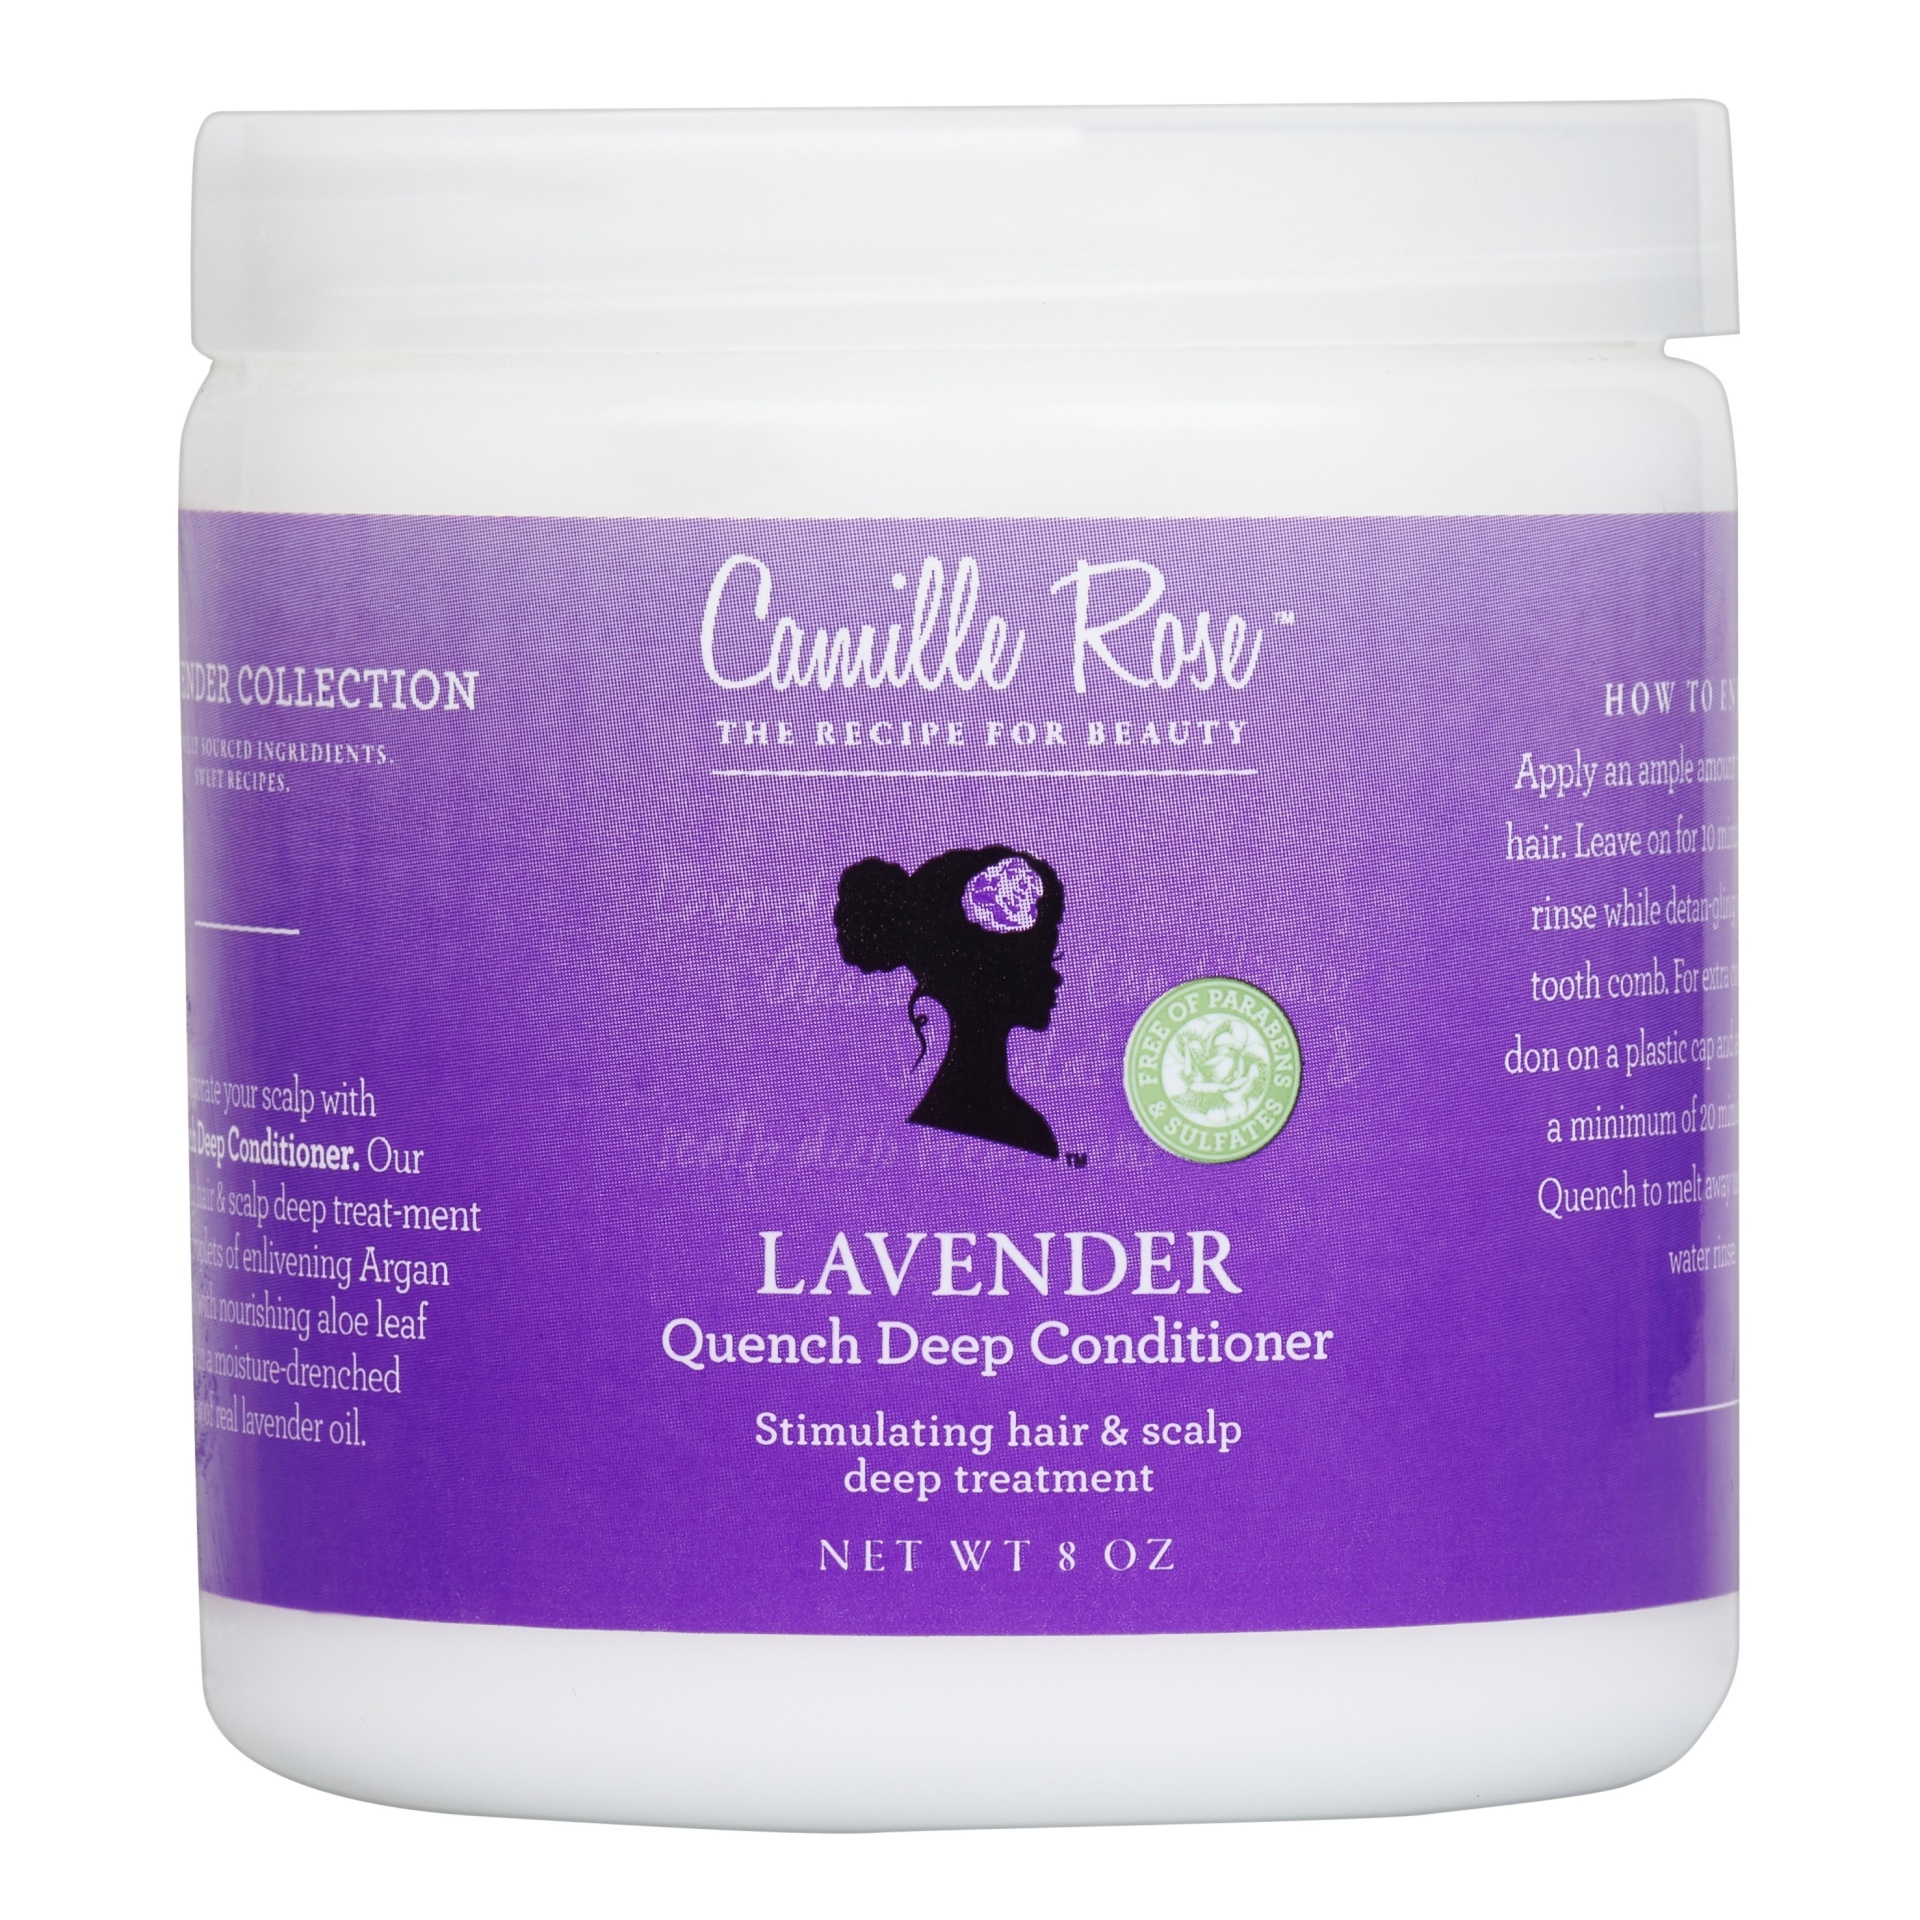 slide 1 of 1, Camille Rose Lavender Quench Deep Conditioner, 8 oz